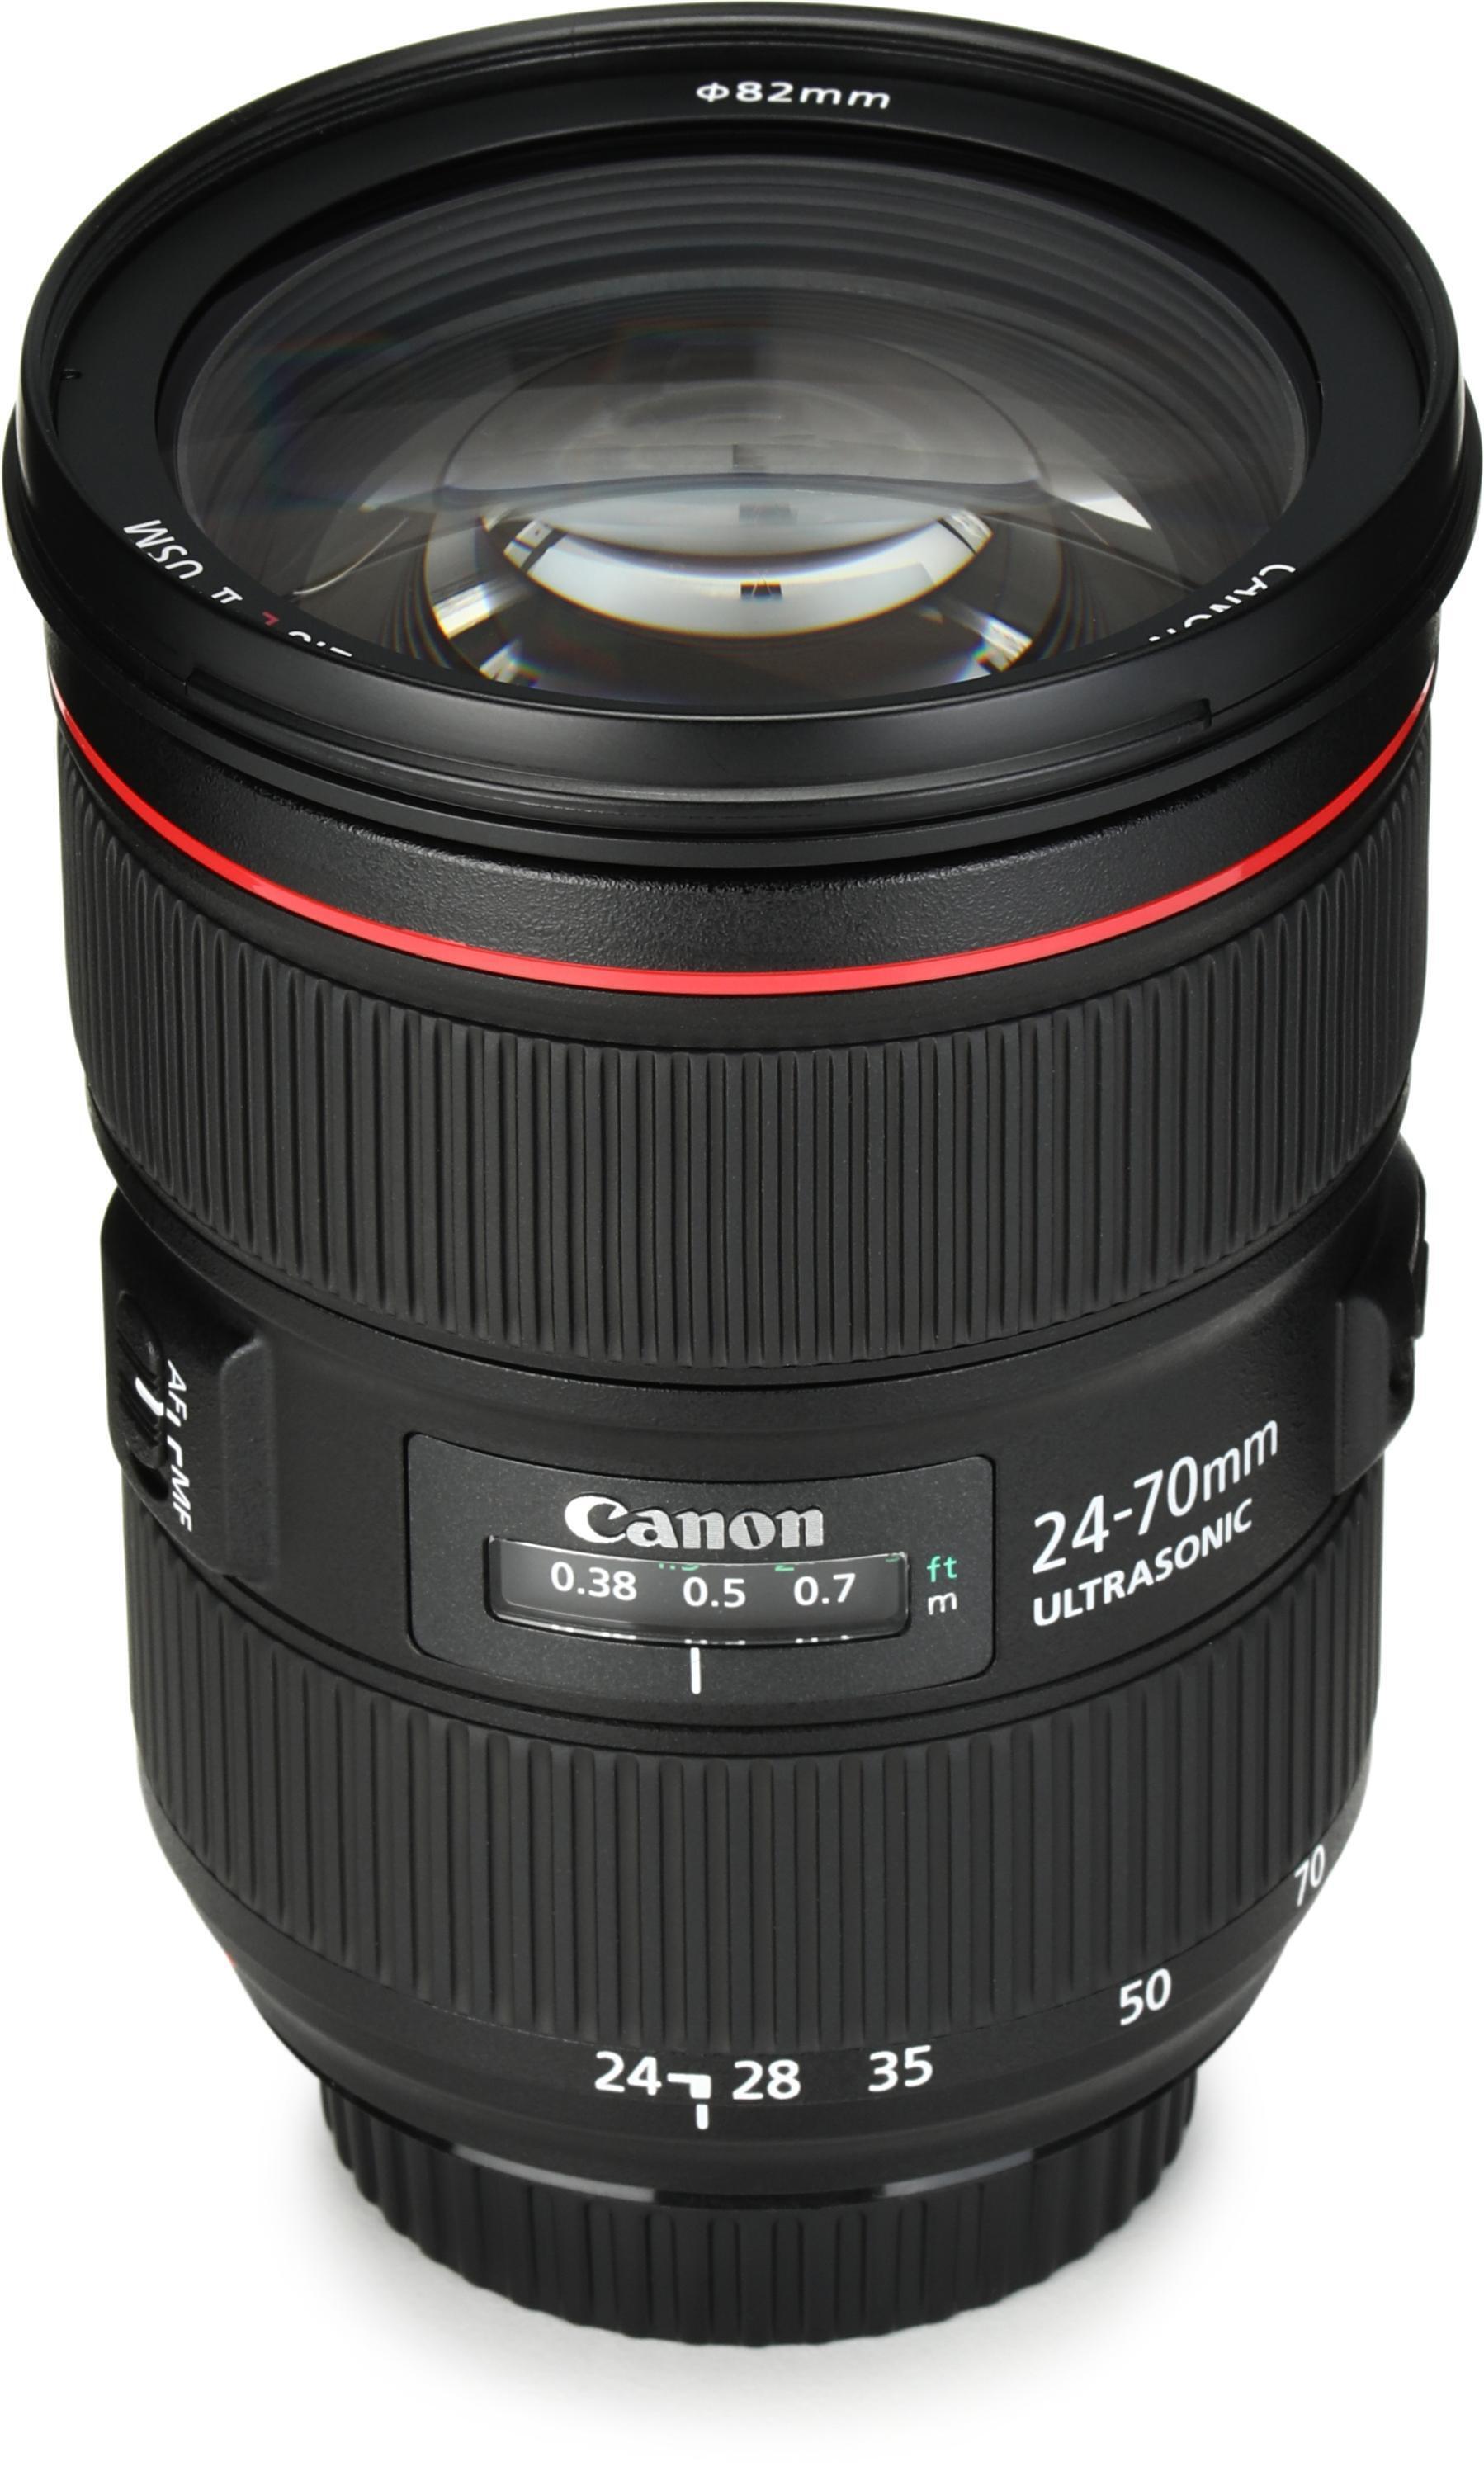 Canon EF 24-70mm f/2.8L II USM Lens | Sweetwater